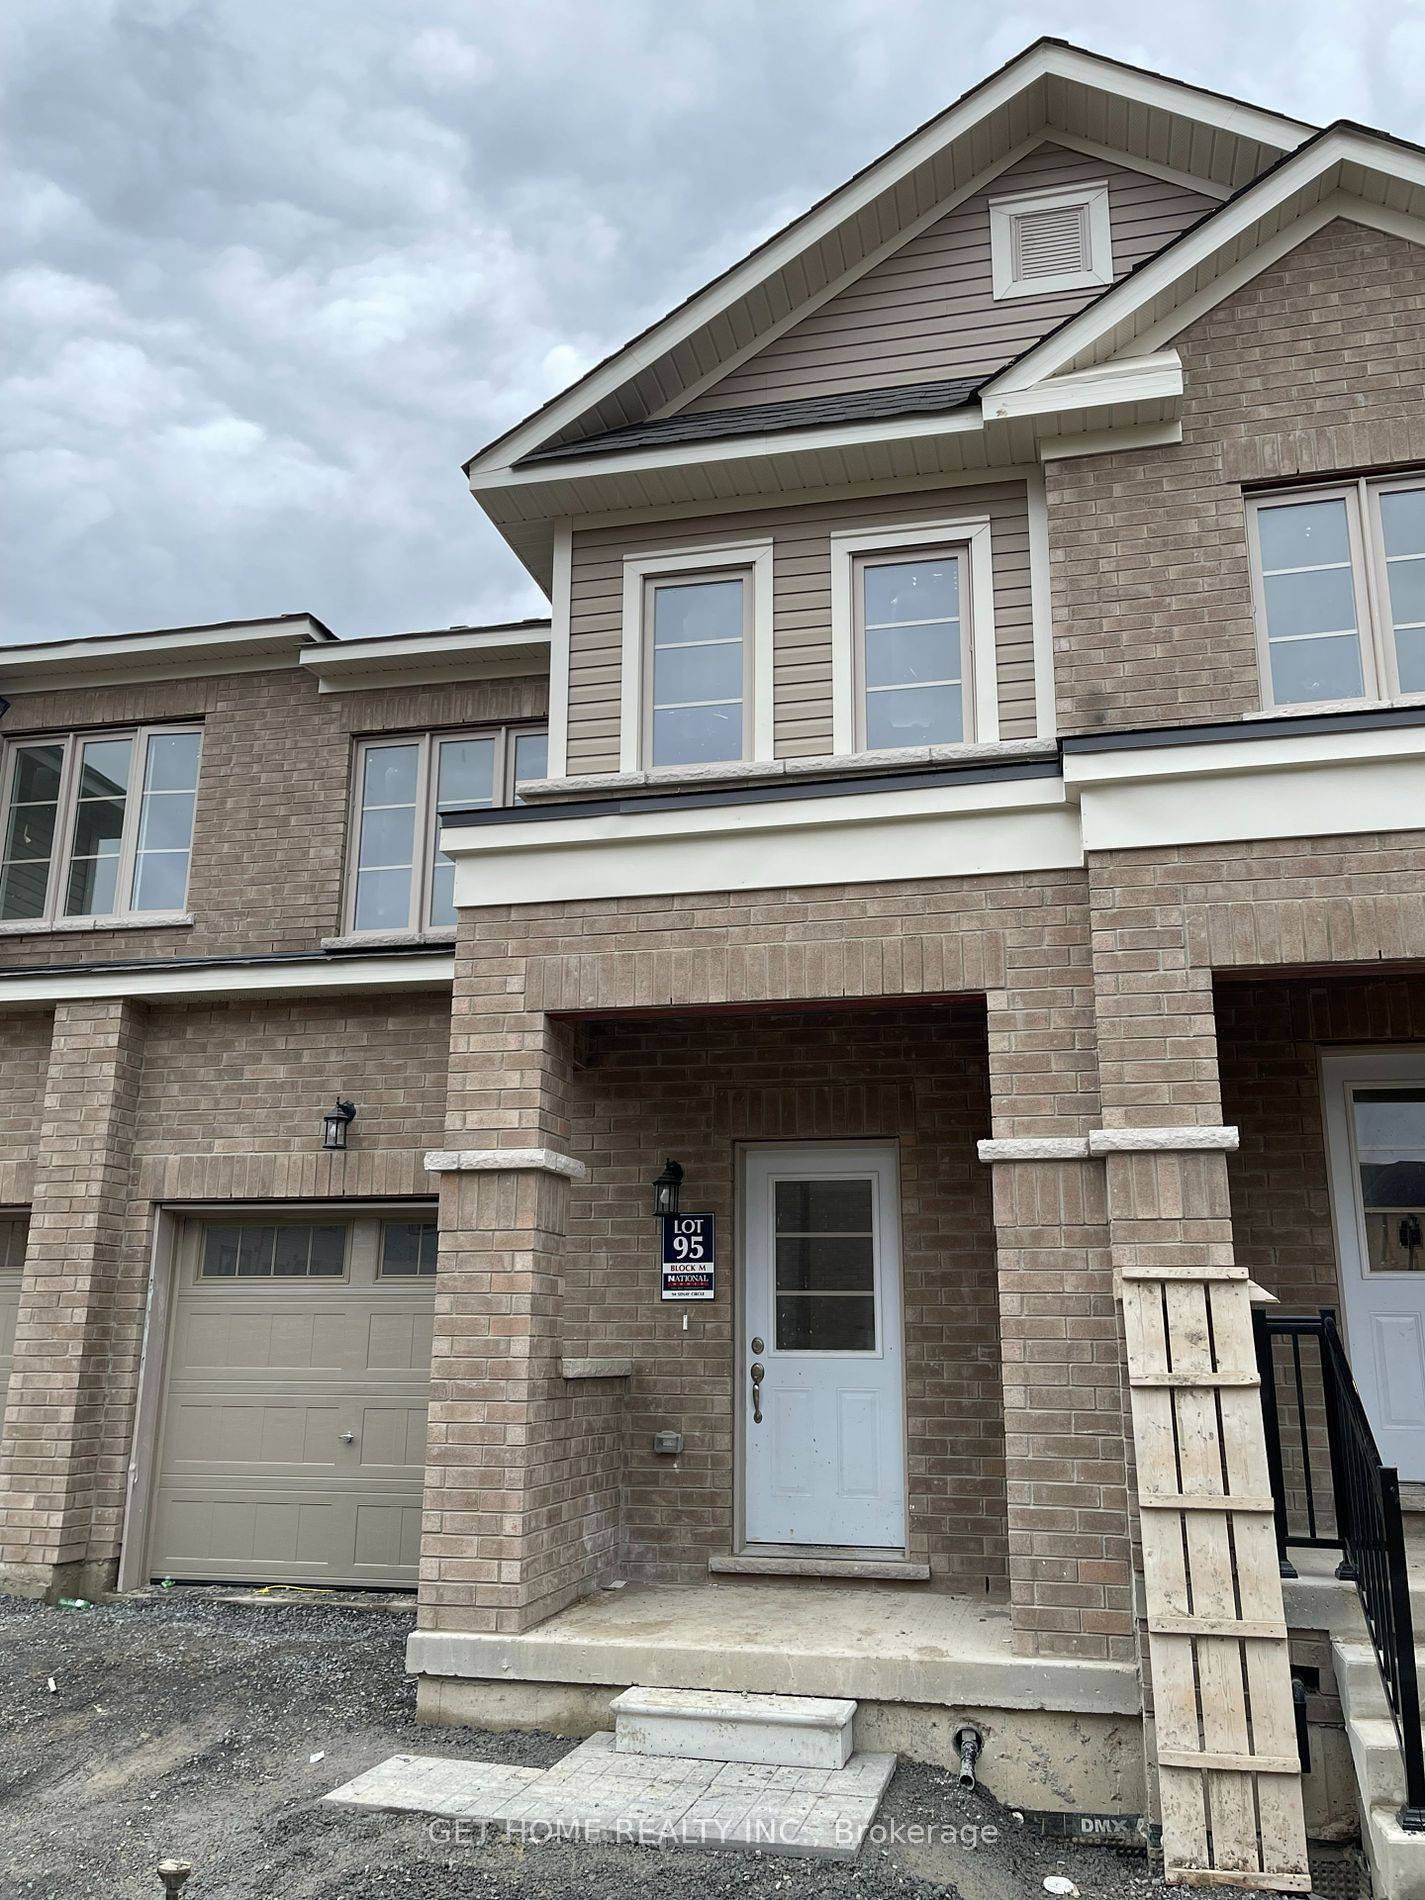 Never Lived In, Brand New Beautiful The Vale Townhome With 3 Spacious Bedrooms And 3 Washrooms, Just Minutes From Hwy 401, Schools And Restaurants.